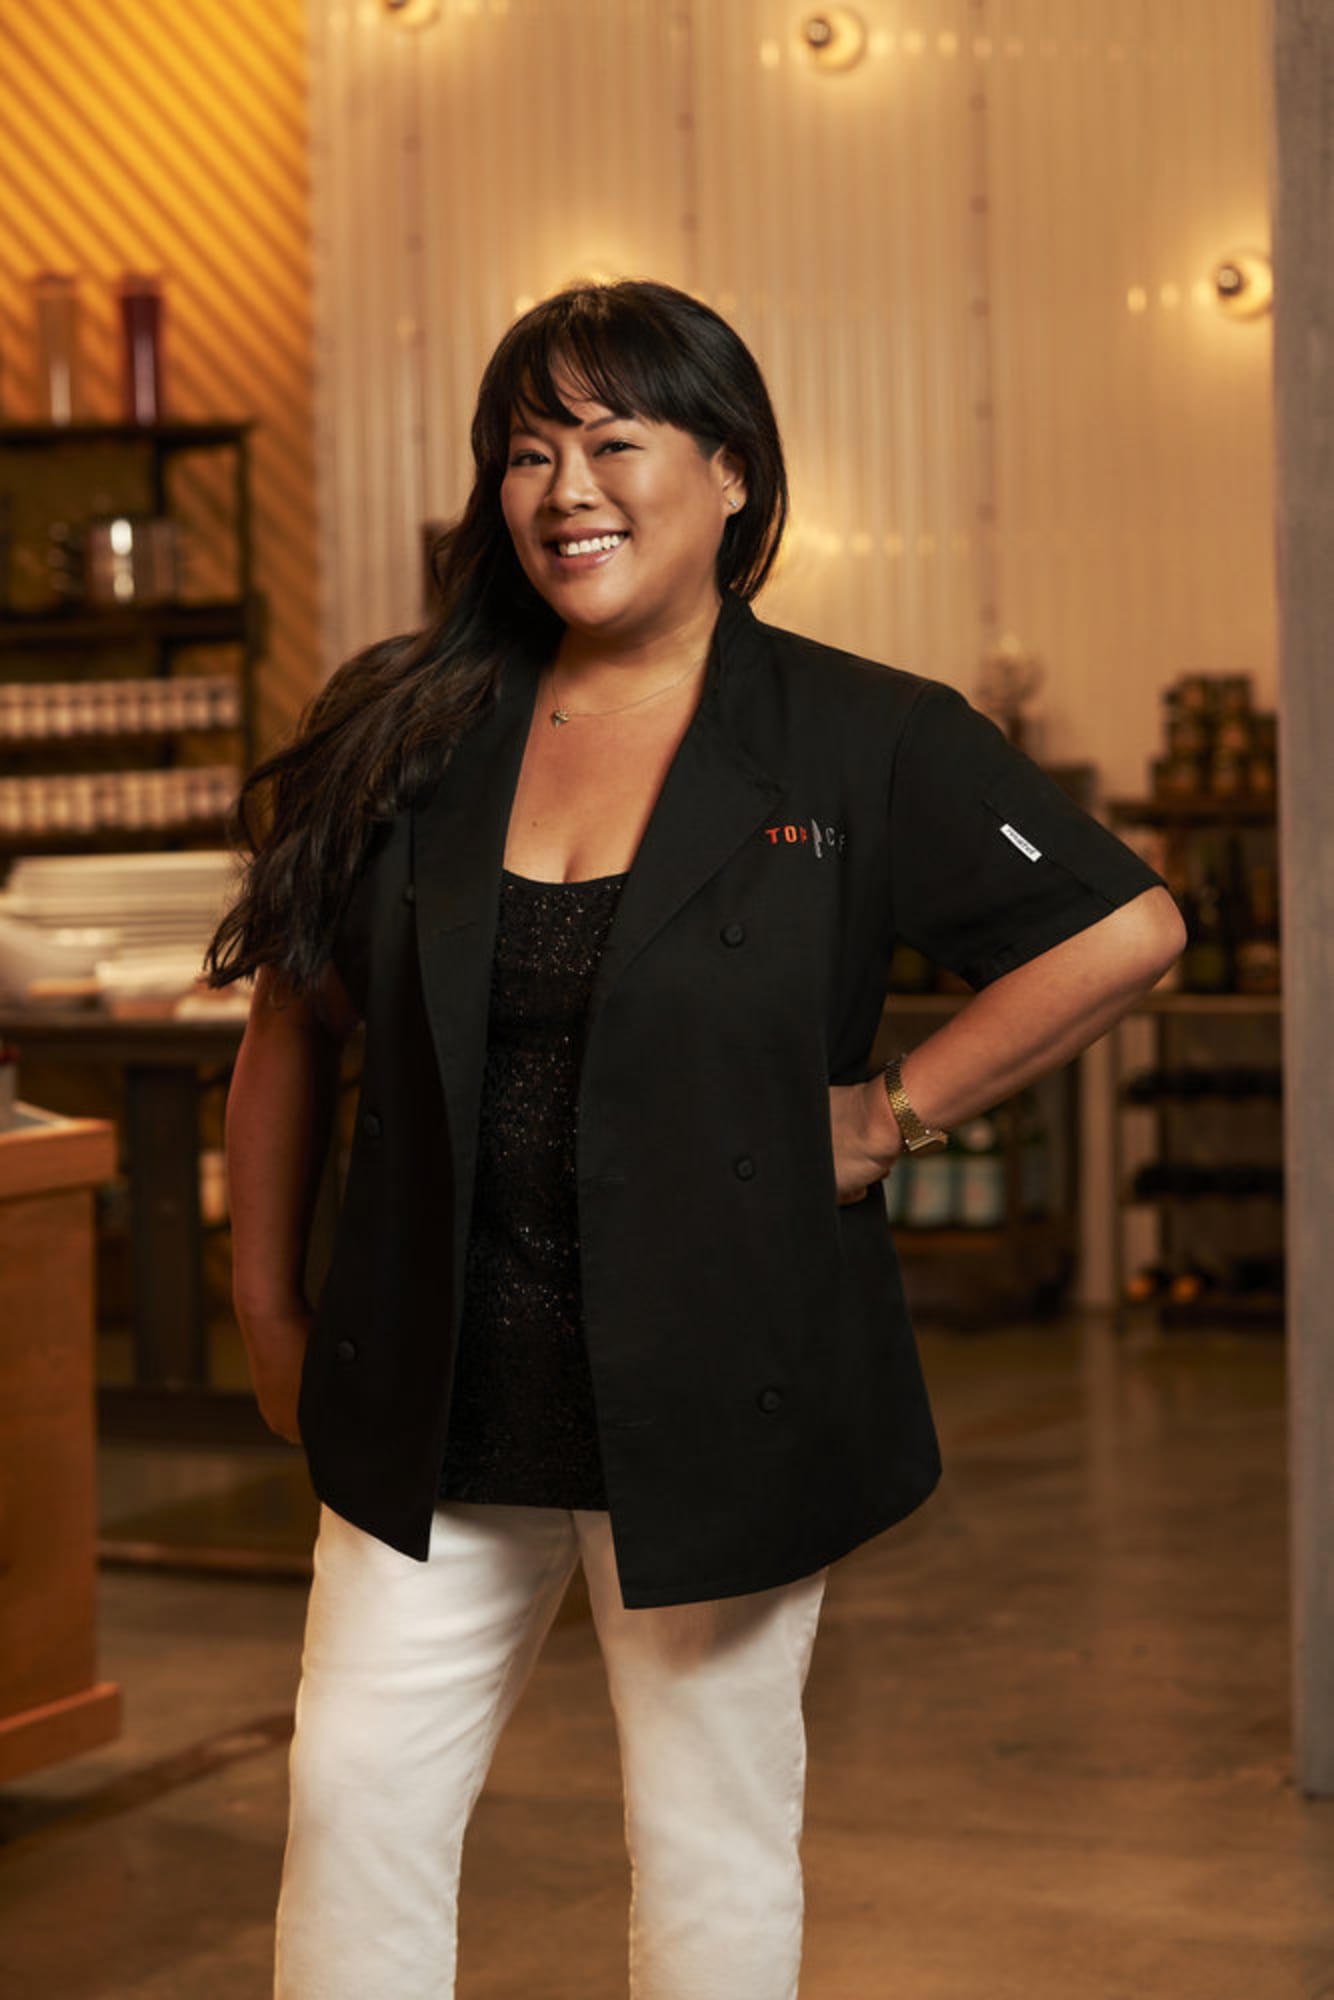 Chef Lee Anne Wong is the quintessential Top Chef, interview